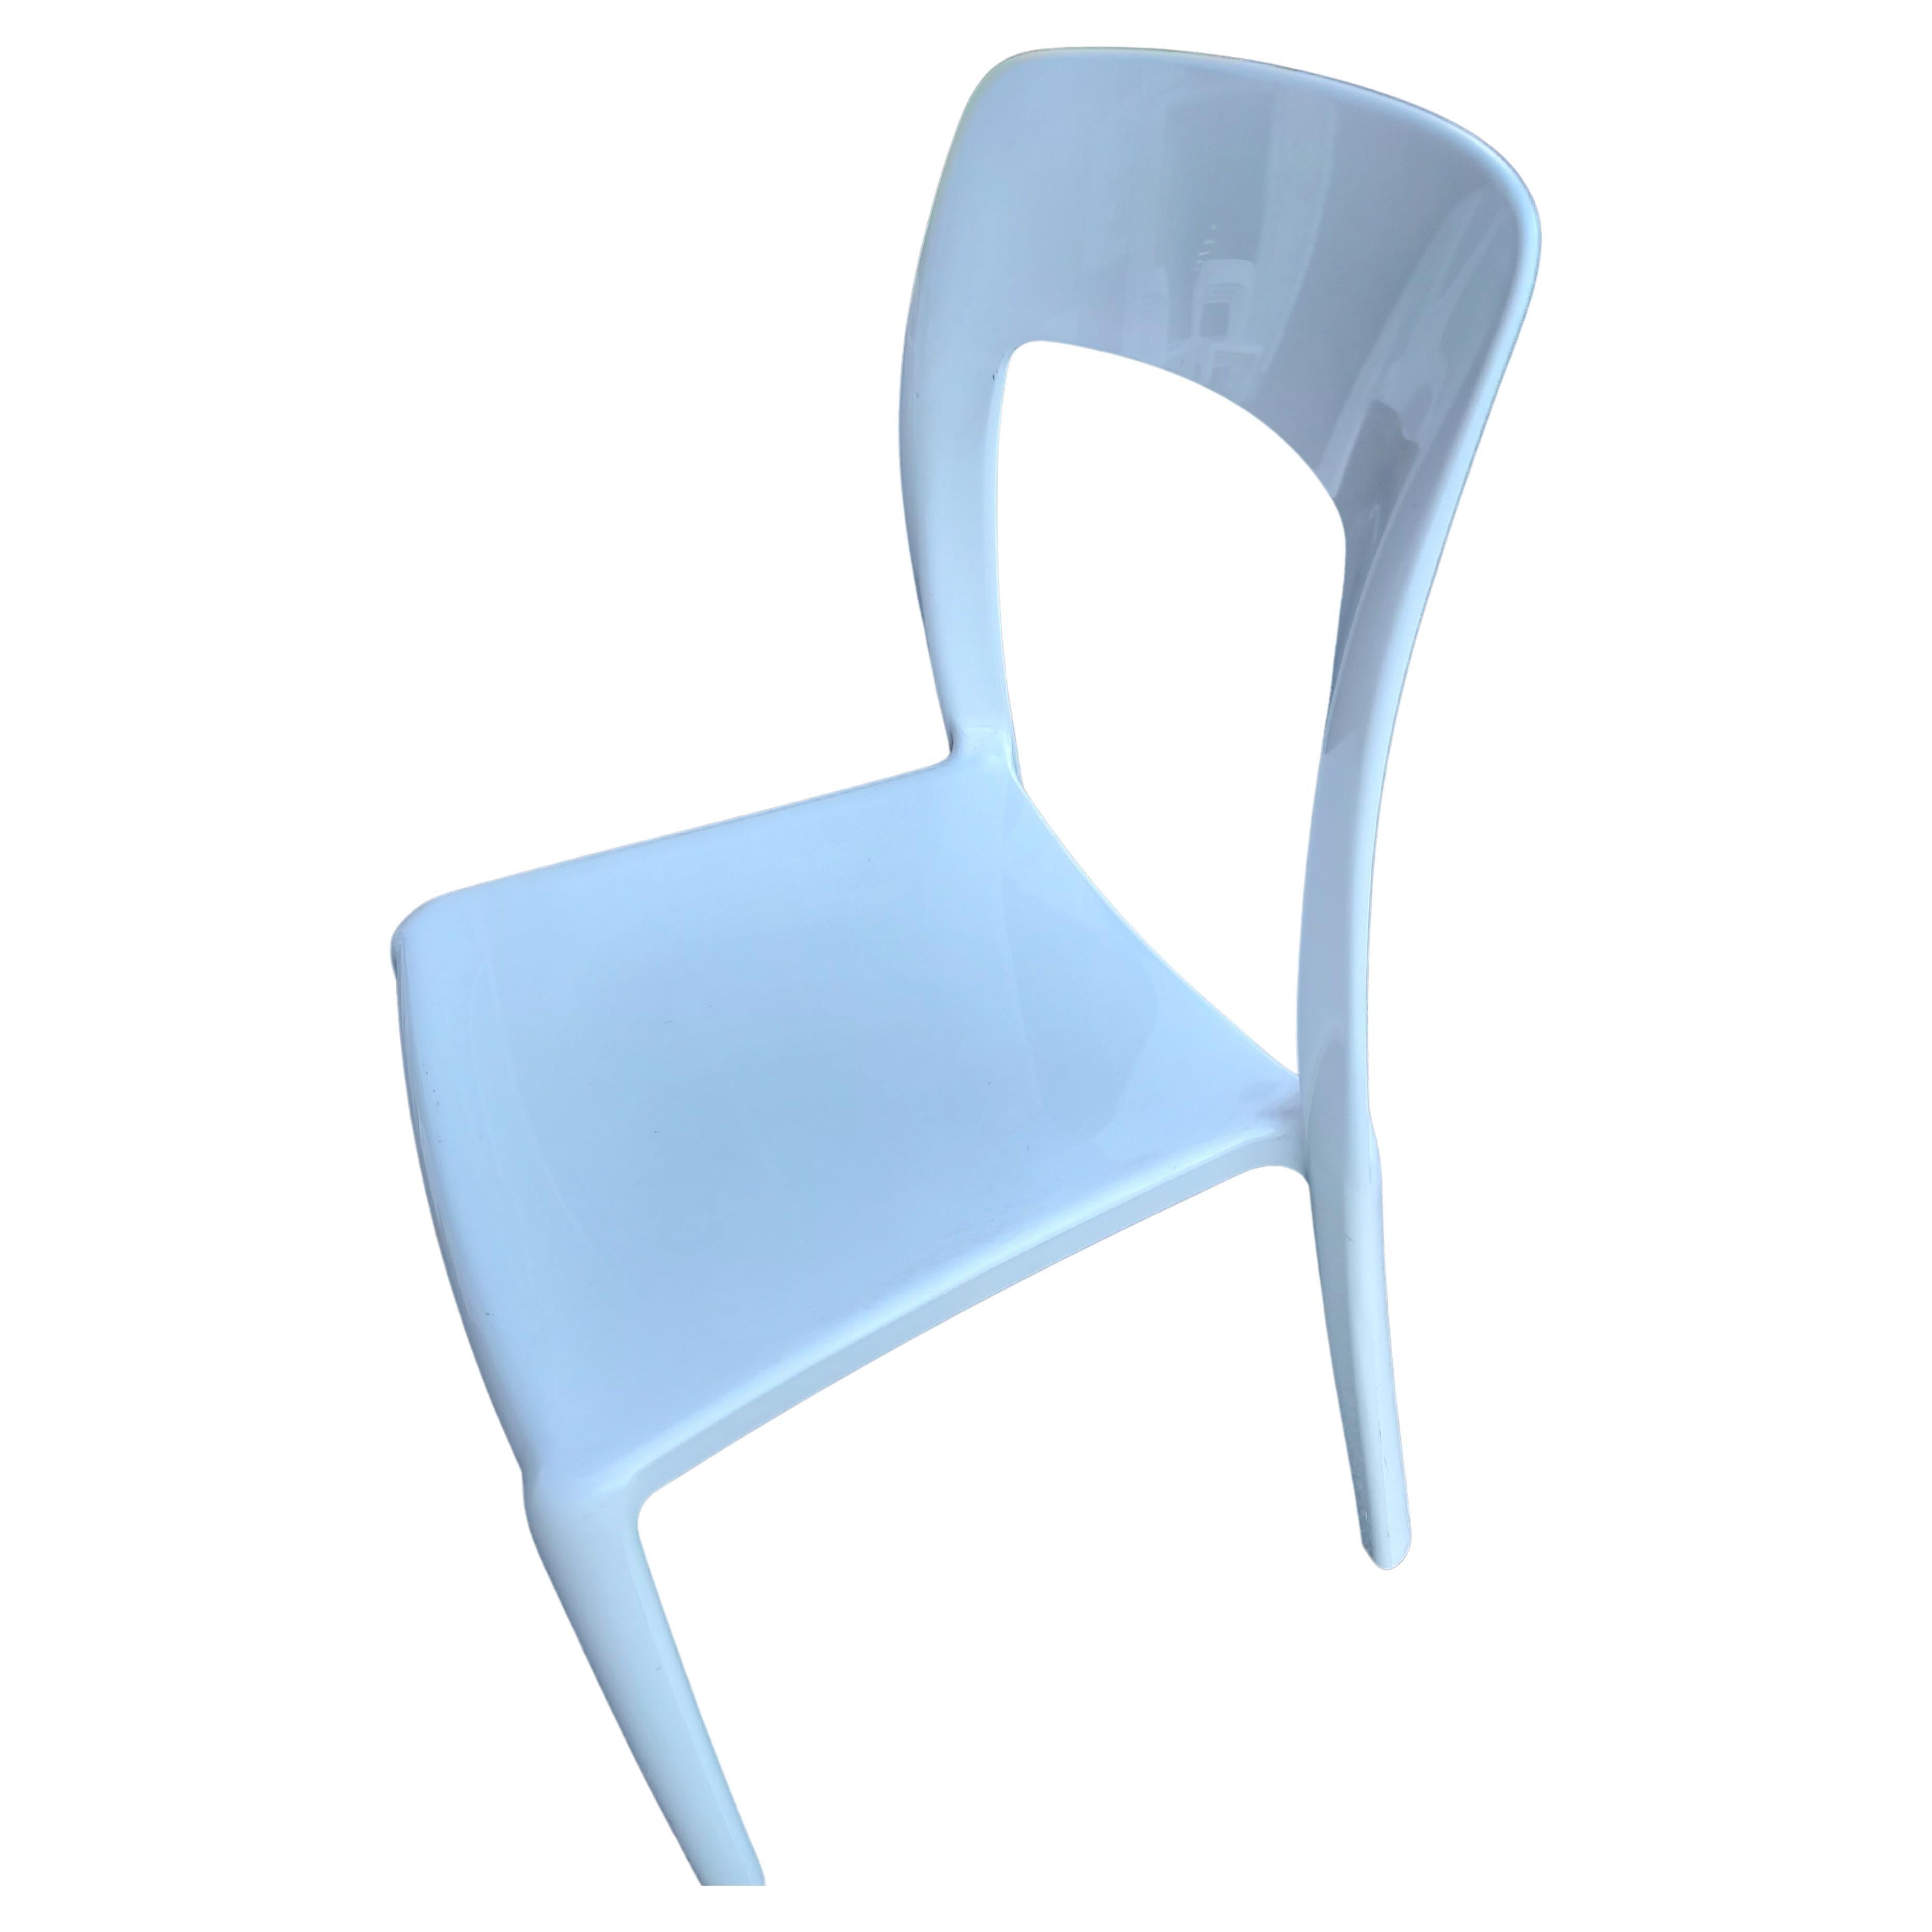 Simple and elegant set of 10 heavy duty stacking chairs in white plastic, not vinyl, by AIR.  Lucite feet on all the legs, chairs are in excellent condition with minimal wear. Stacking them is easy and can stack as many as needed for optimum space.